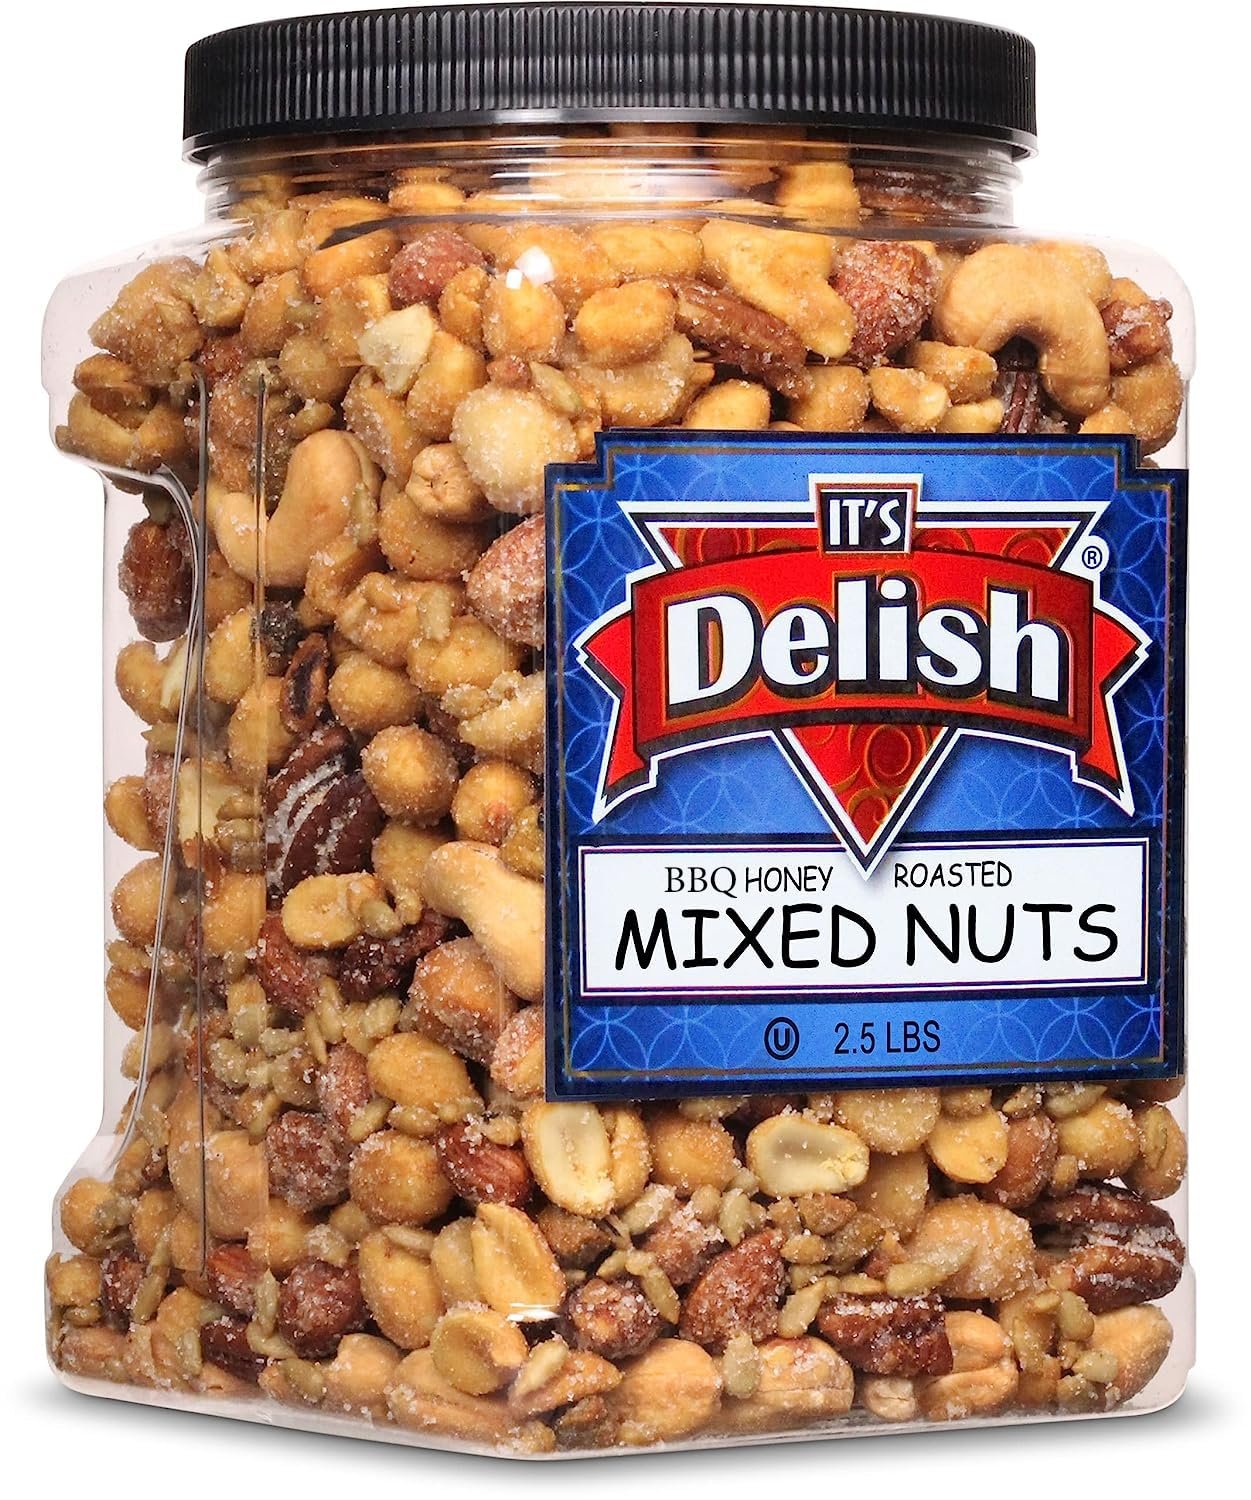 BBQ Honey Roasted Mixed Nuts, 2.5 LBS Jumbo Container – Its Delish